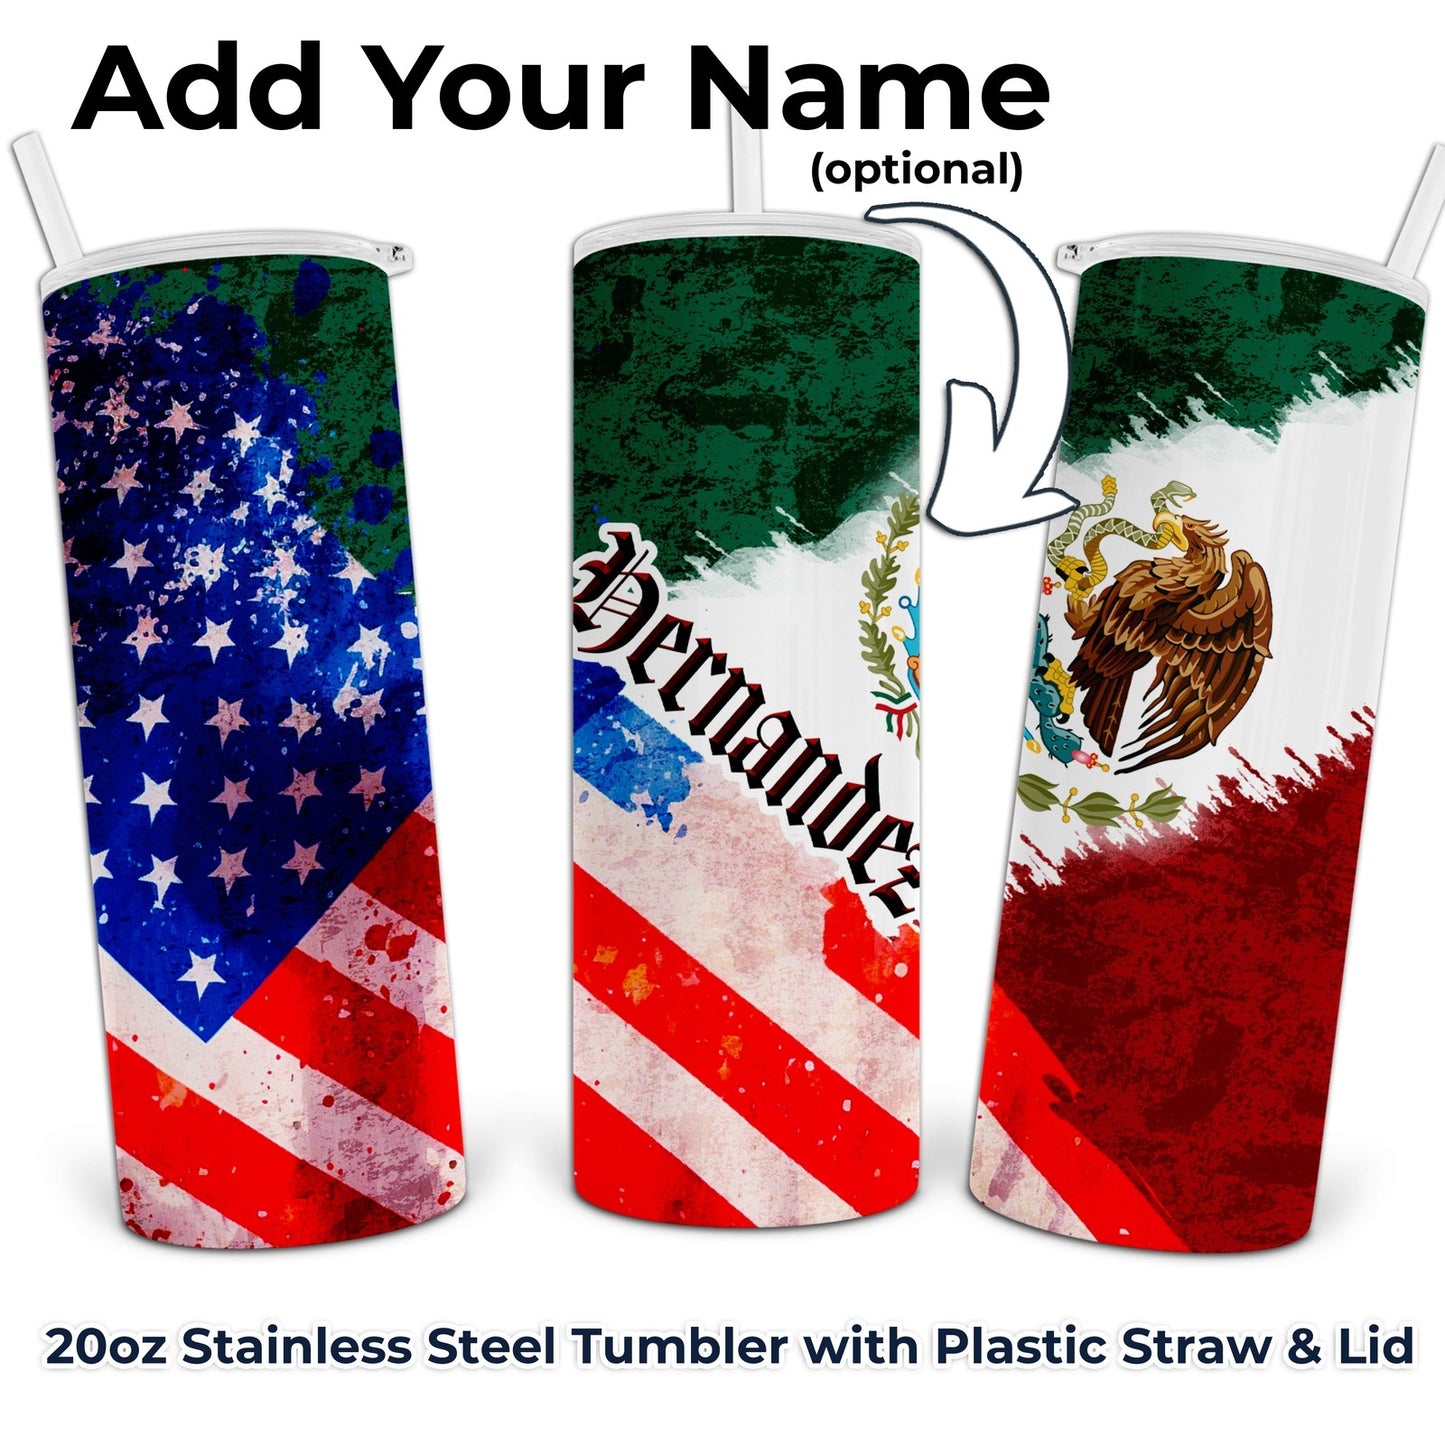 Artistic Mexican American Tumbler - Add Your Name Tumbler - 20oz Stainless Steel Tumbler with Lid and Straw